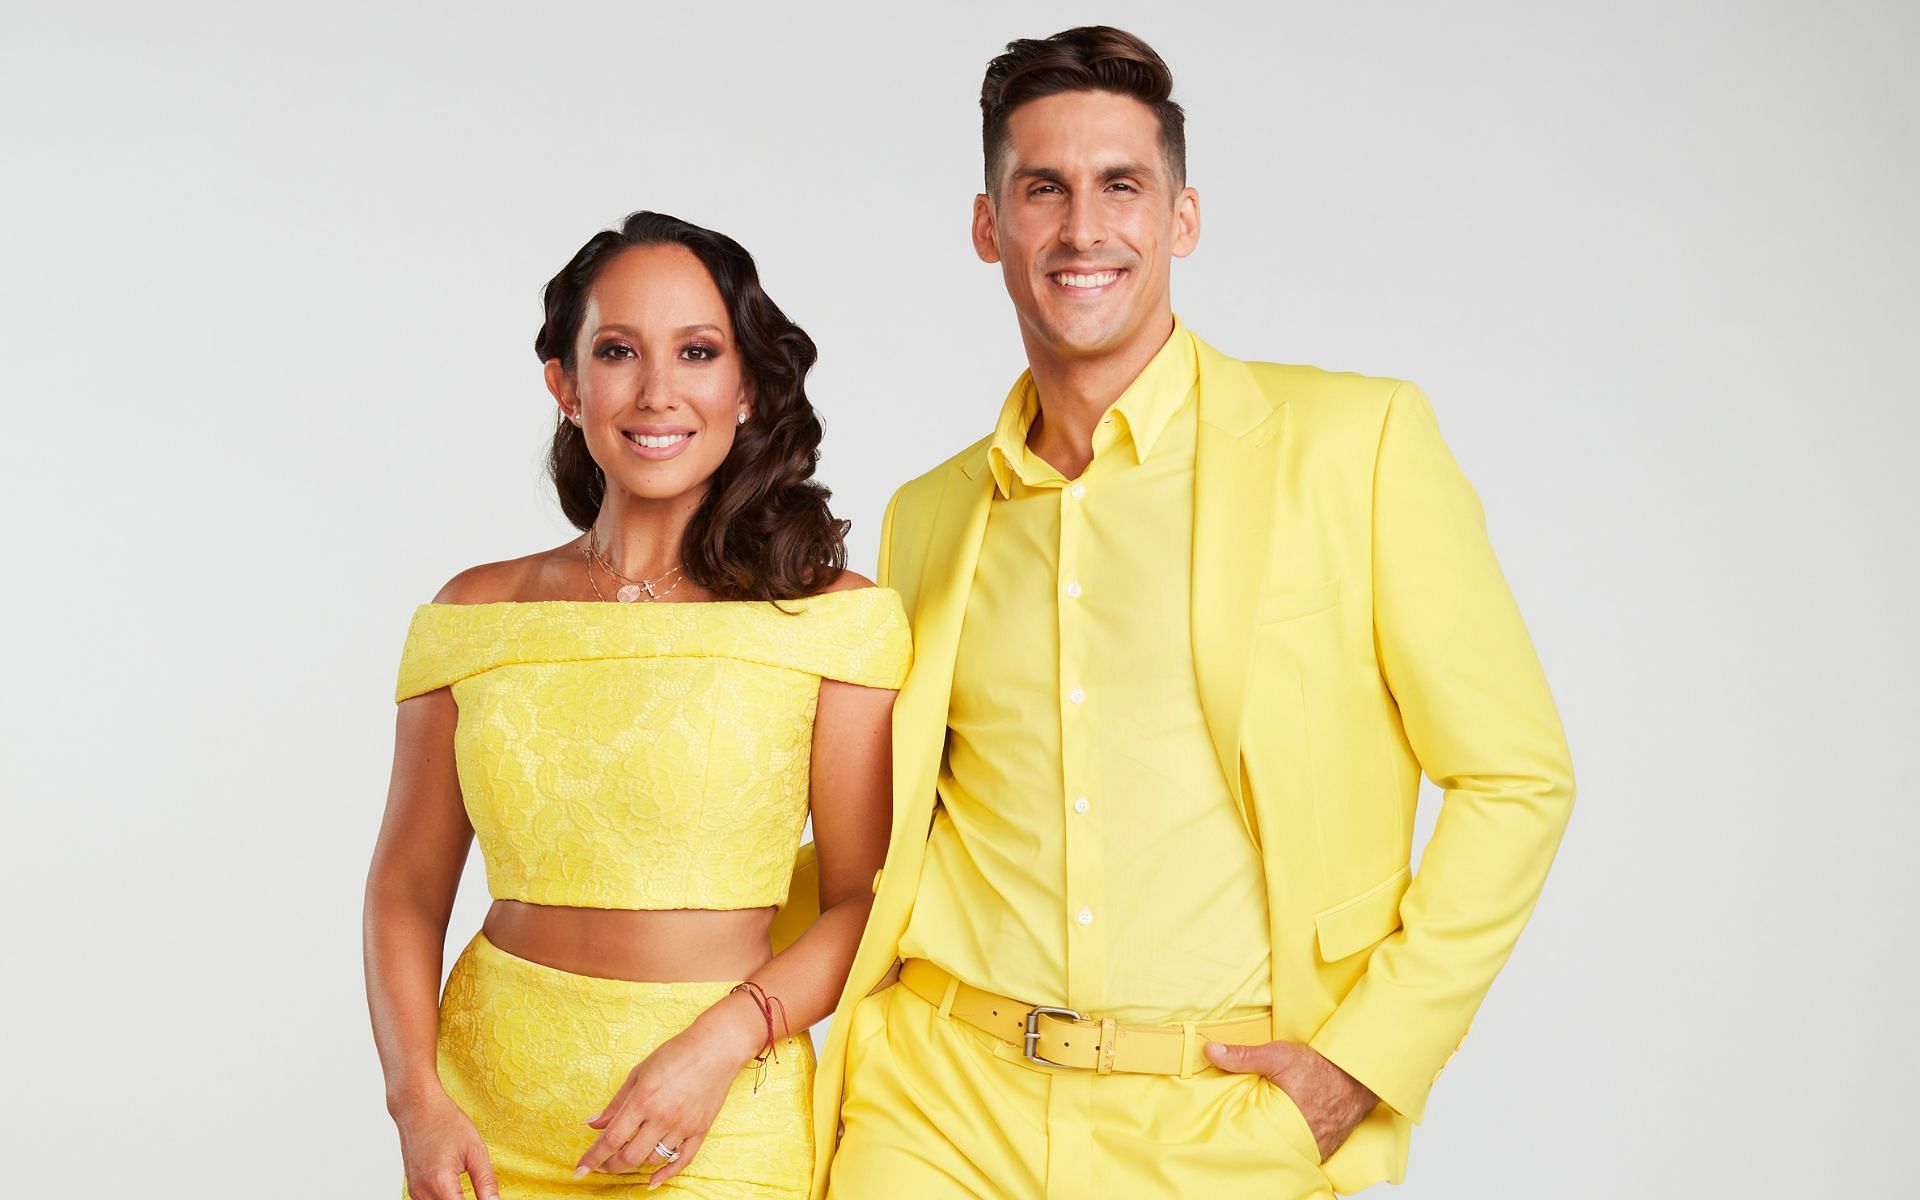 Cody Rigsby and Cheryl Burke from &#039;Dancing with the Stars&#039; (Image via Maarten de Boer/ABC)